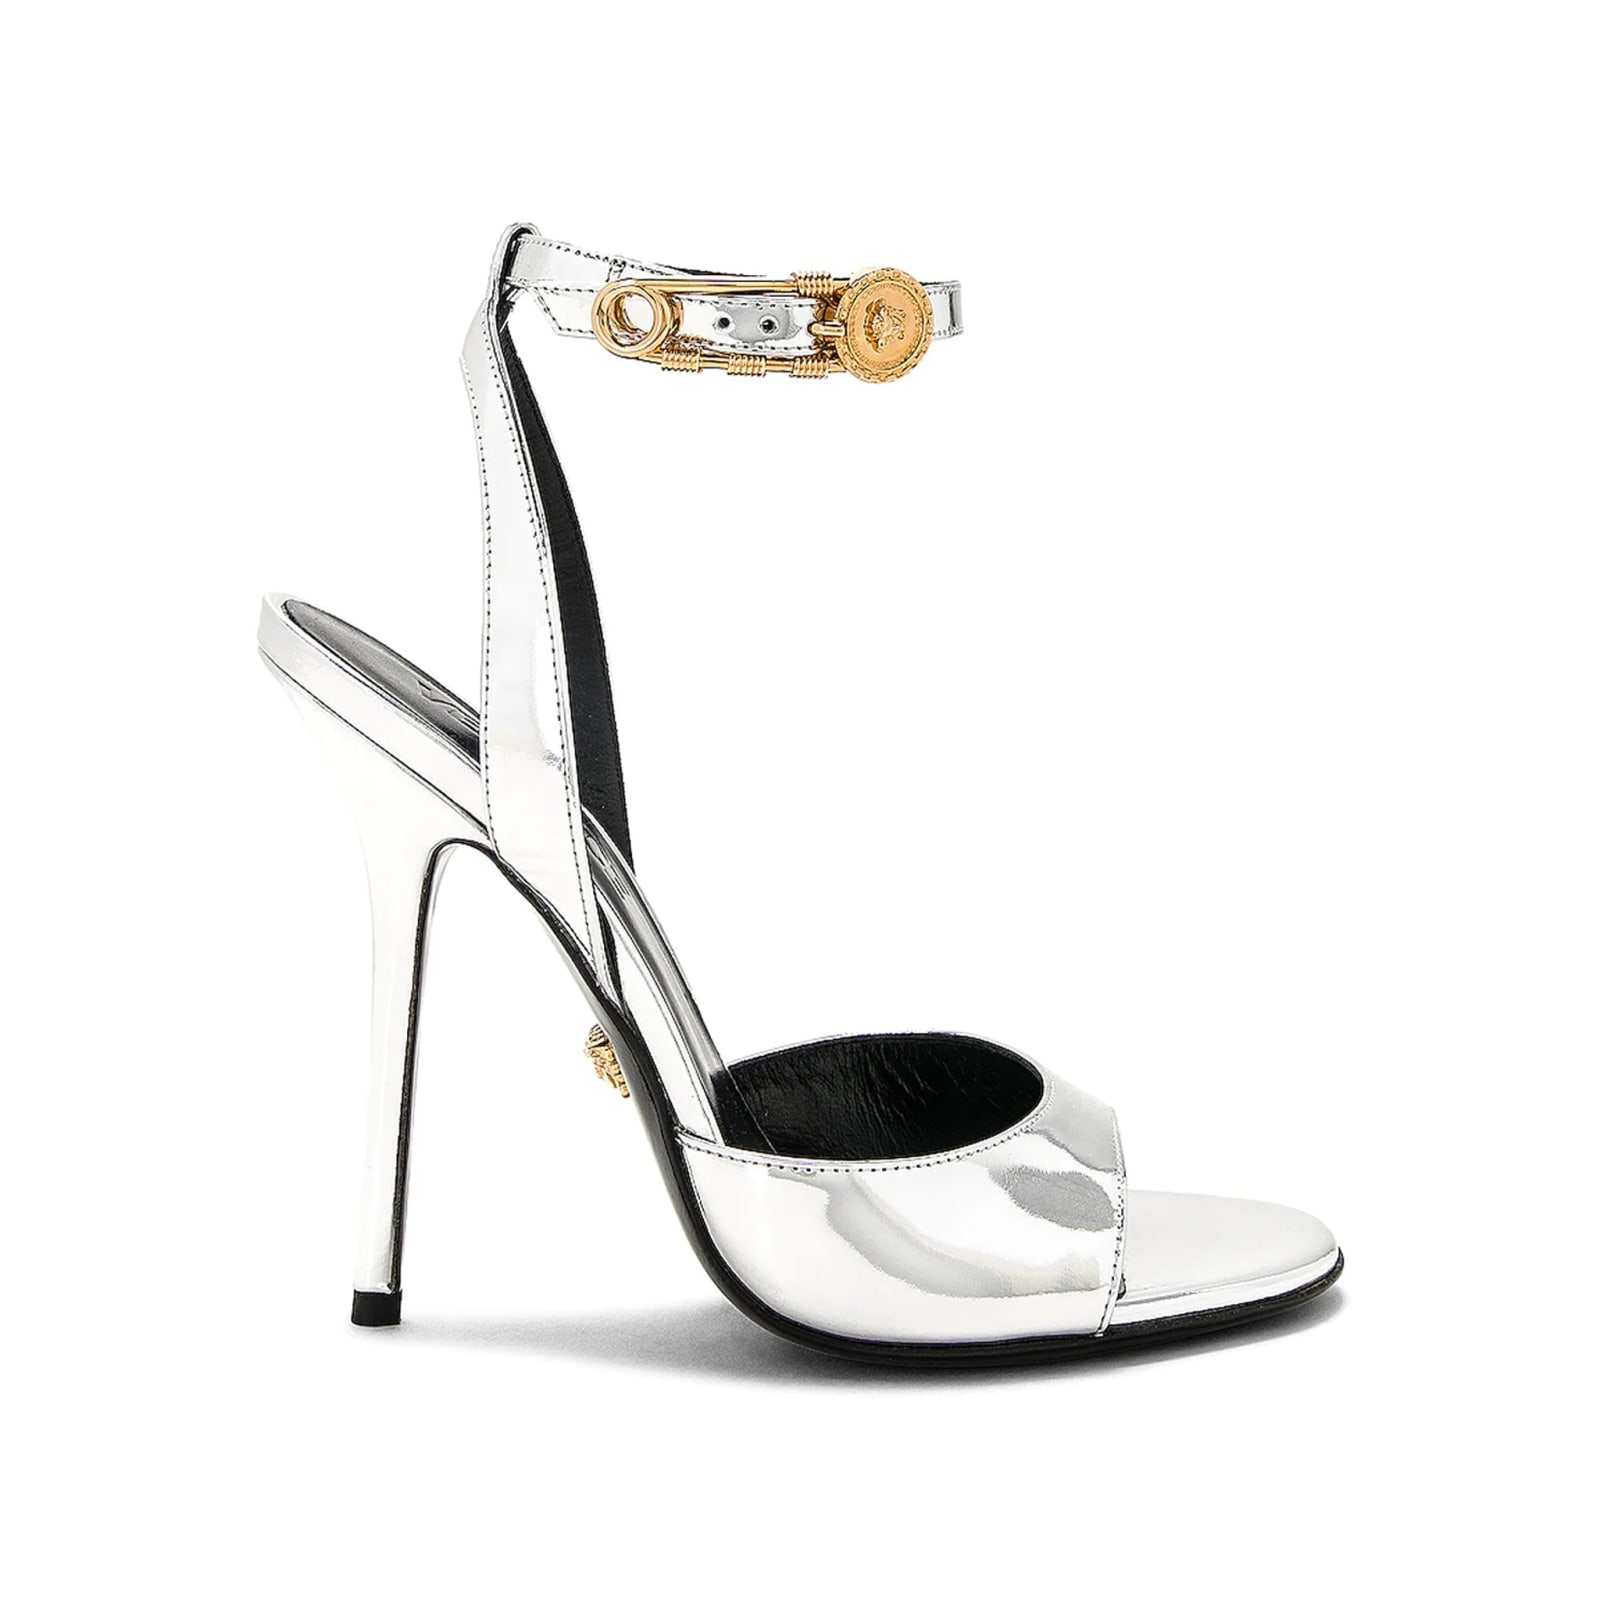 Patent Leather Sandals